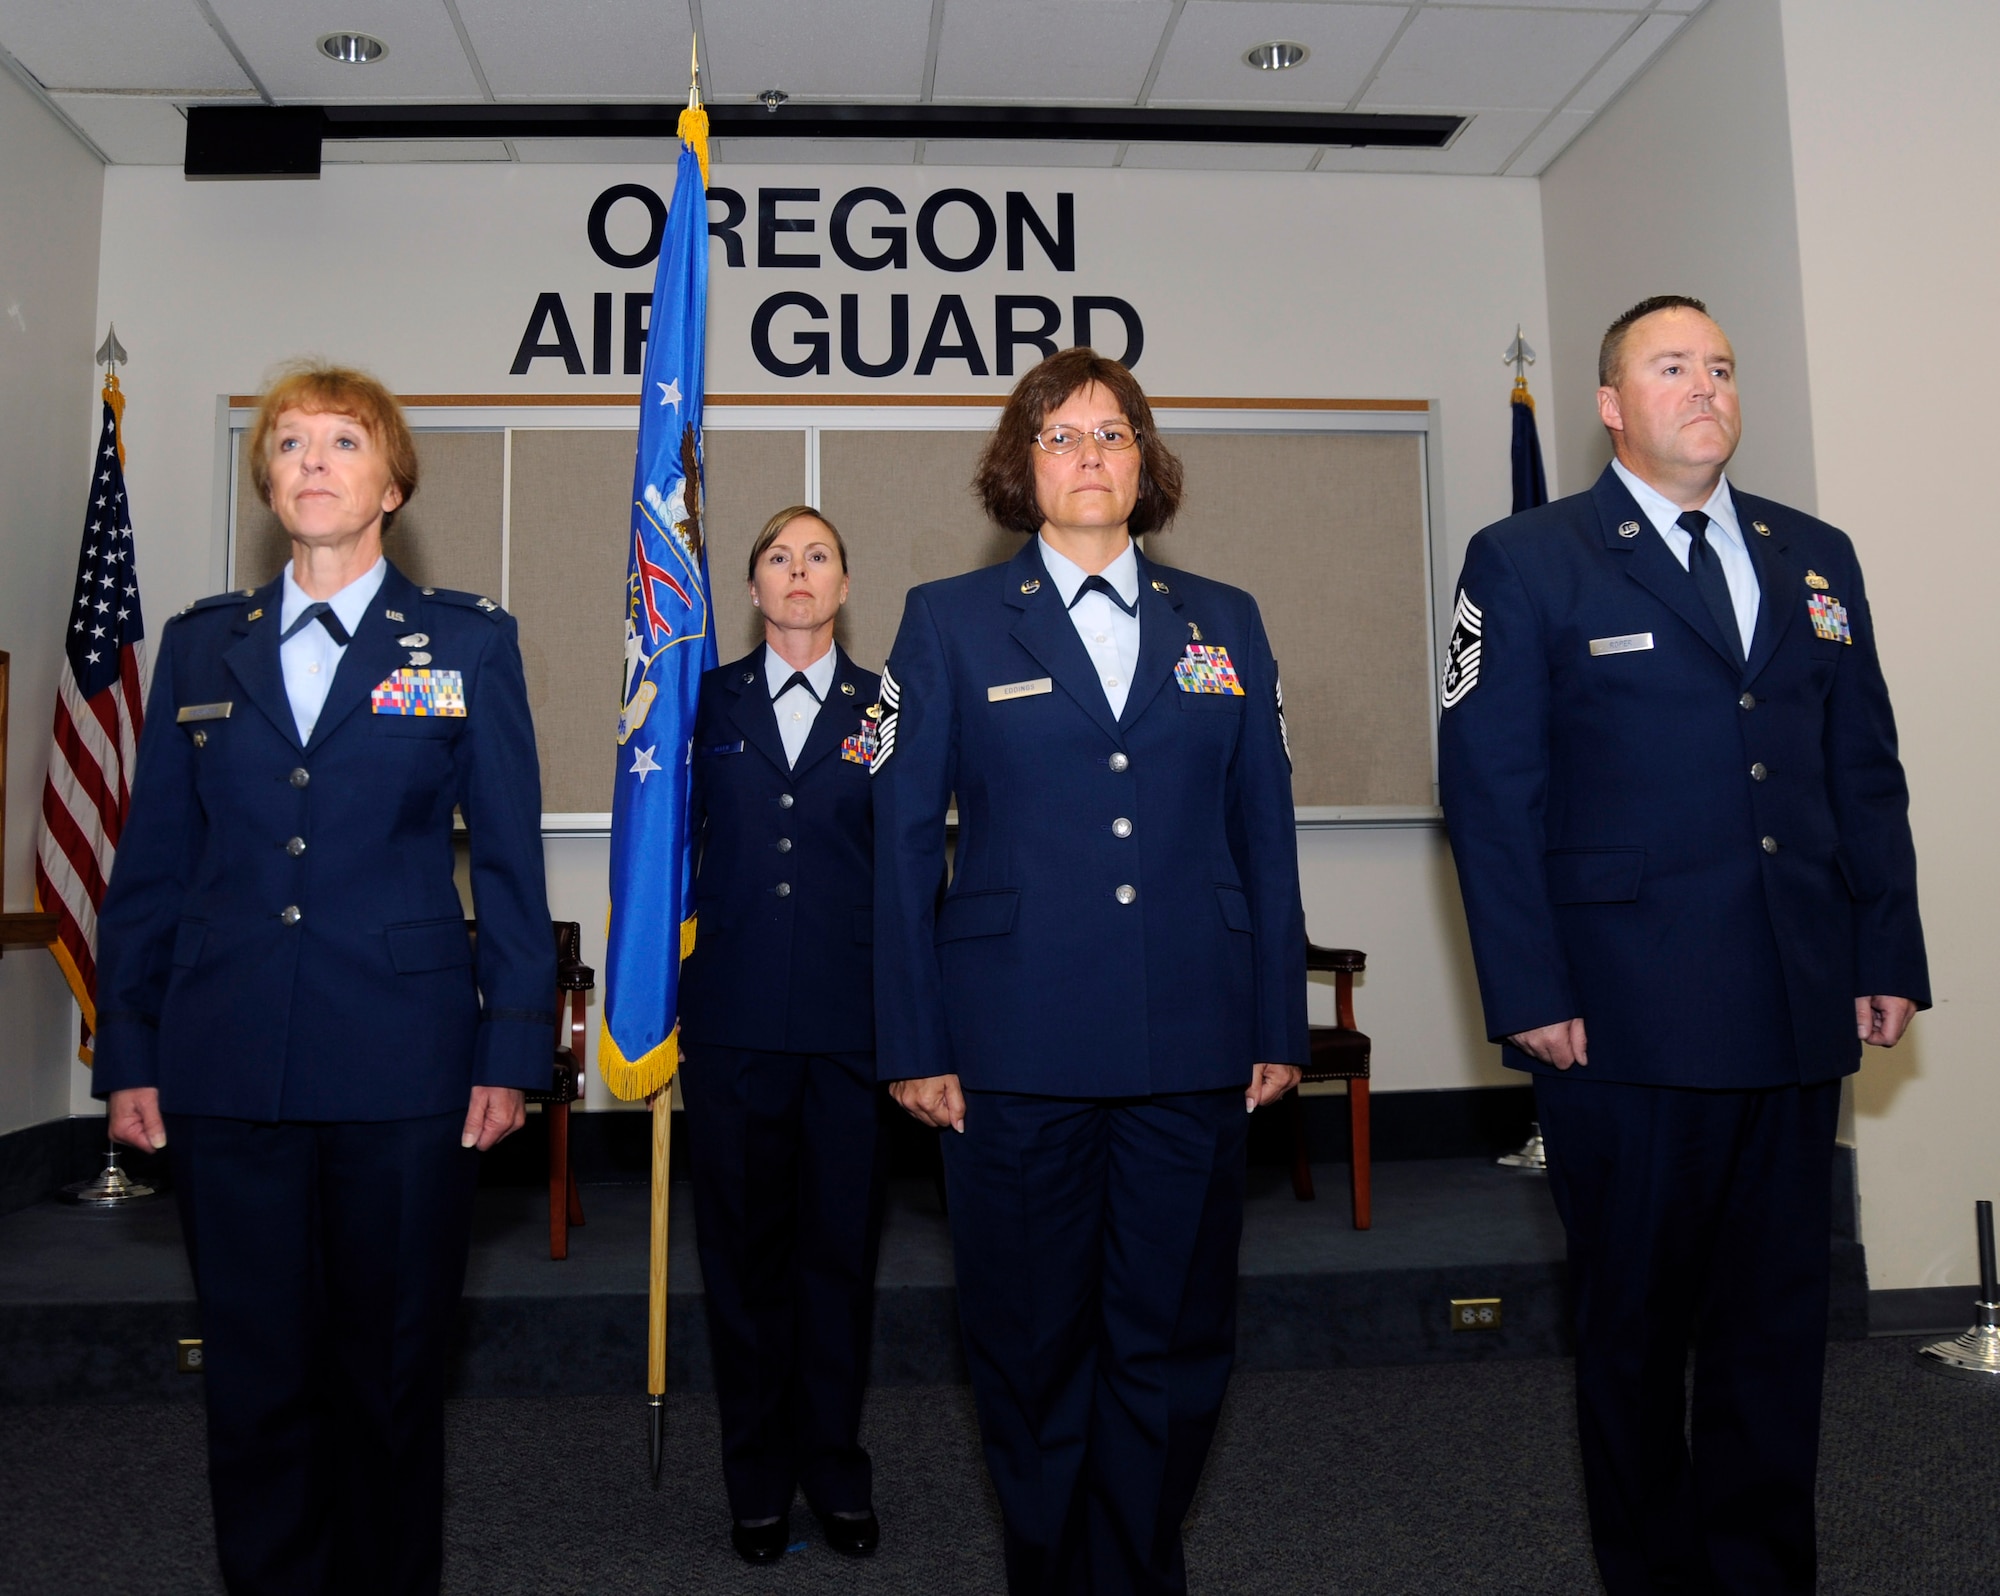 Col. Donna Prigmore, 142nd Fighter Wing Vice Commander, left, outgoing Command Chief Master Sgt. Julie Eddings, center, and incoming 142nd Command Chief Master Sgt. Chris Roper, right, stand at attention during the opening of their Change of Authority ceremony, Sept. 13, 2015, Portland Air National Guard Base, Ore. (U.S. Air National Guard photo by Tech. Sgt. Aaron Perkins, 142nd Fighter Wing Public Affairs/released)